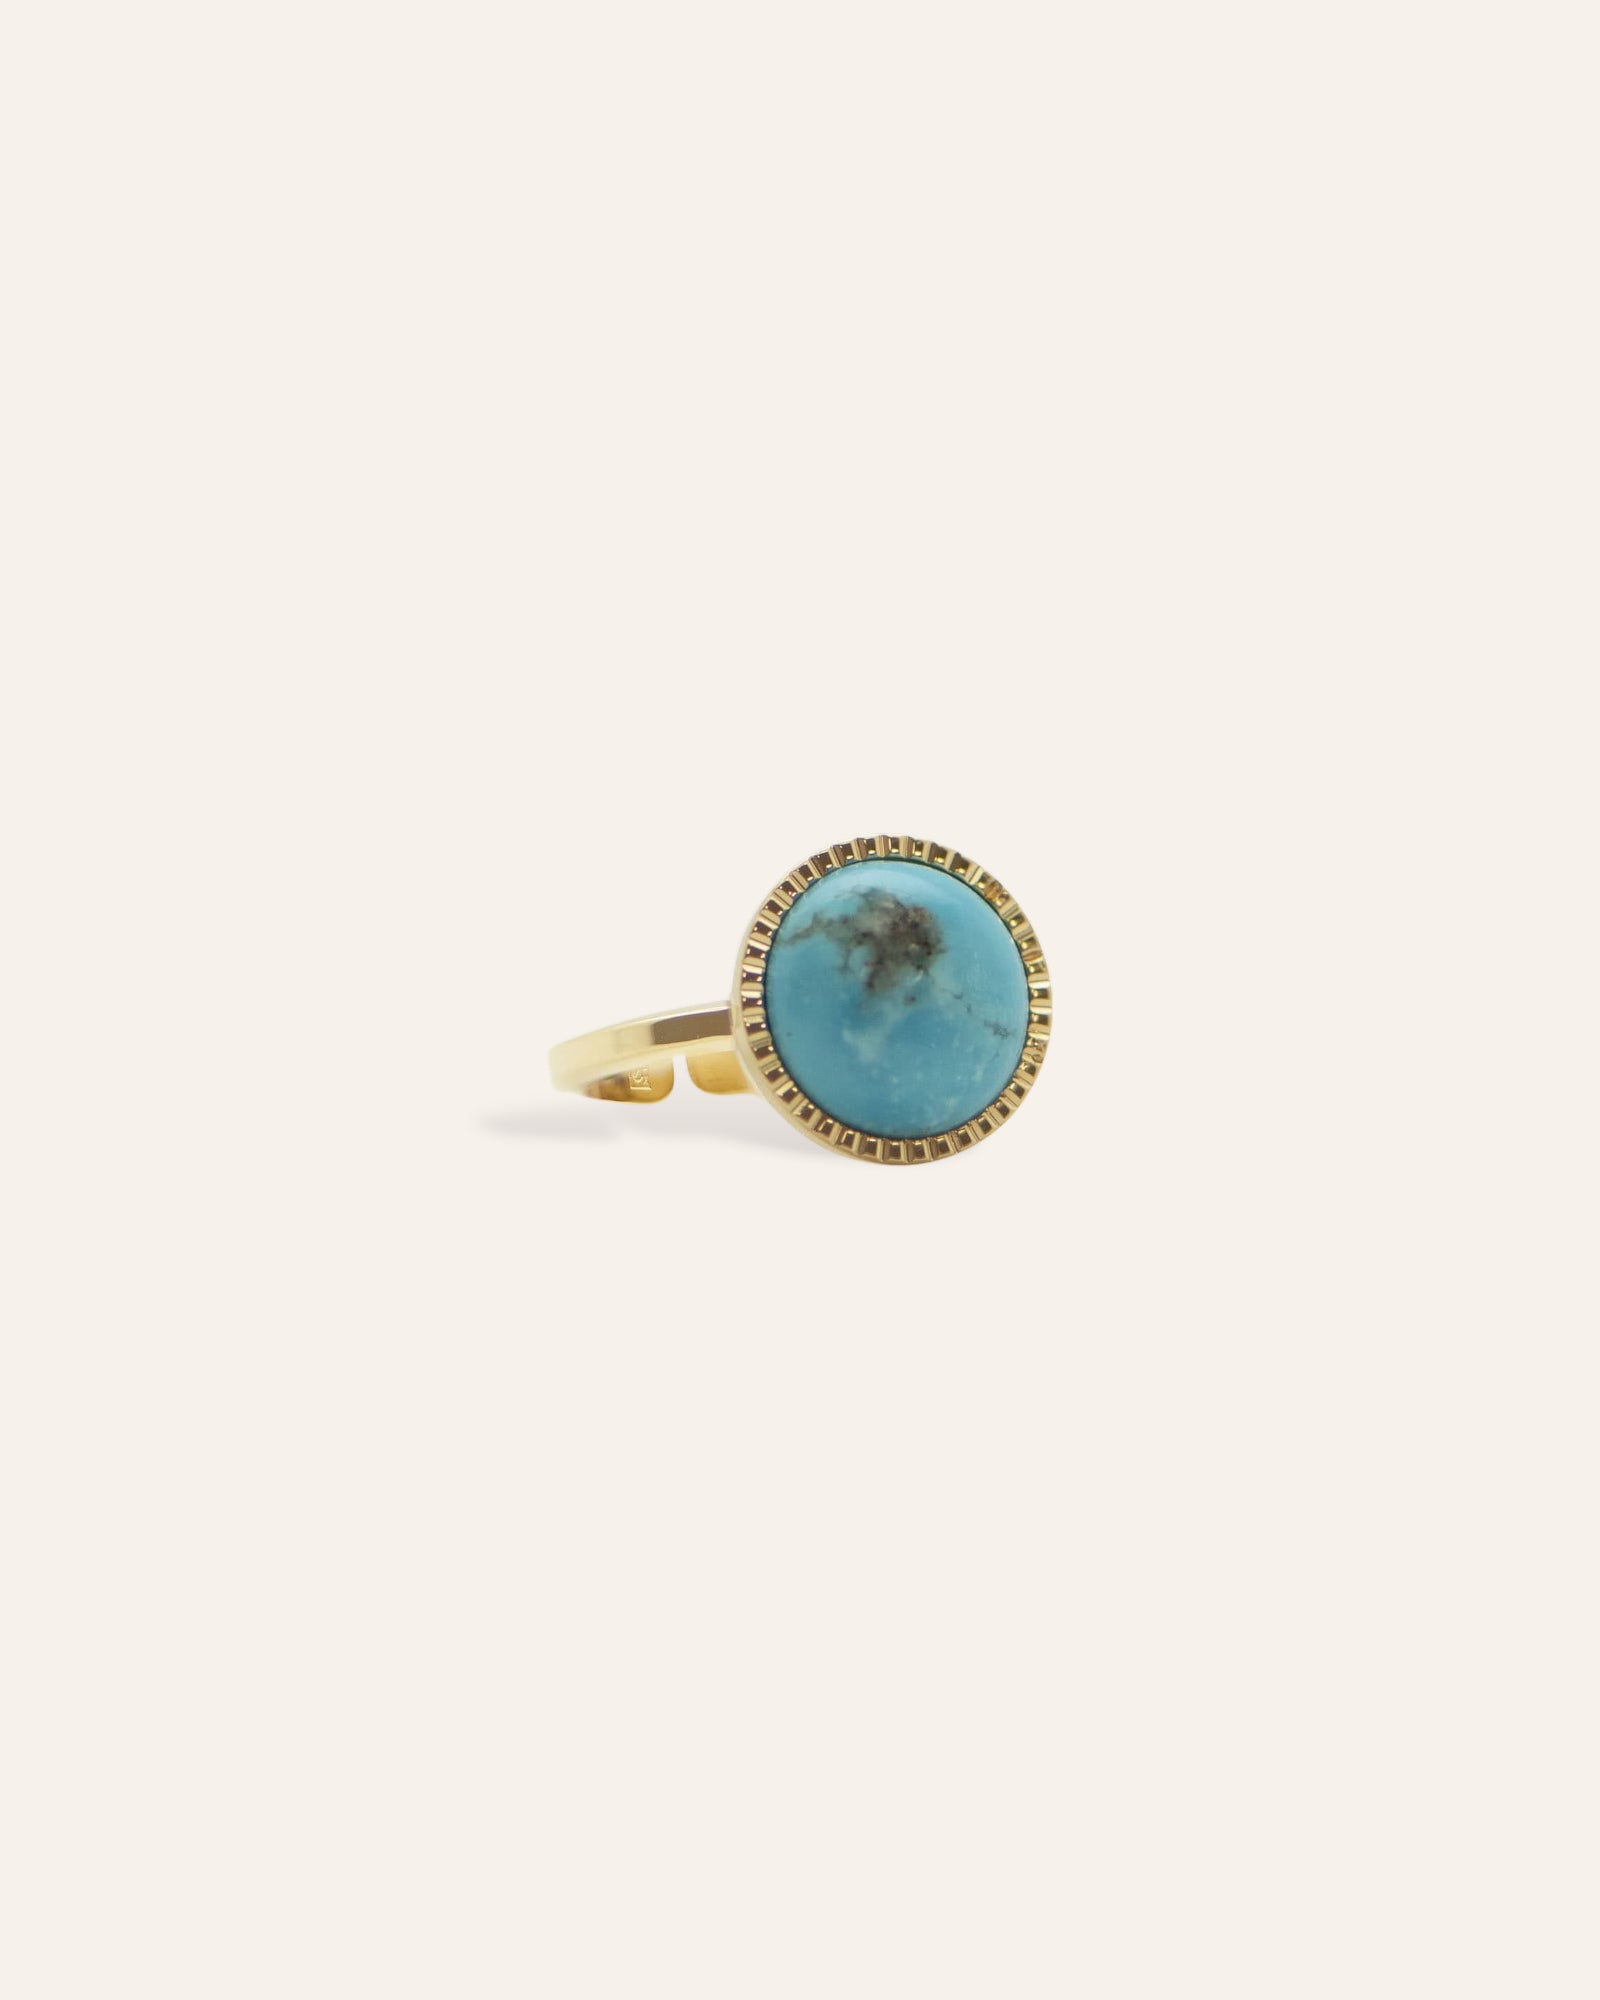 Tonalea gold and turquoise ring